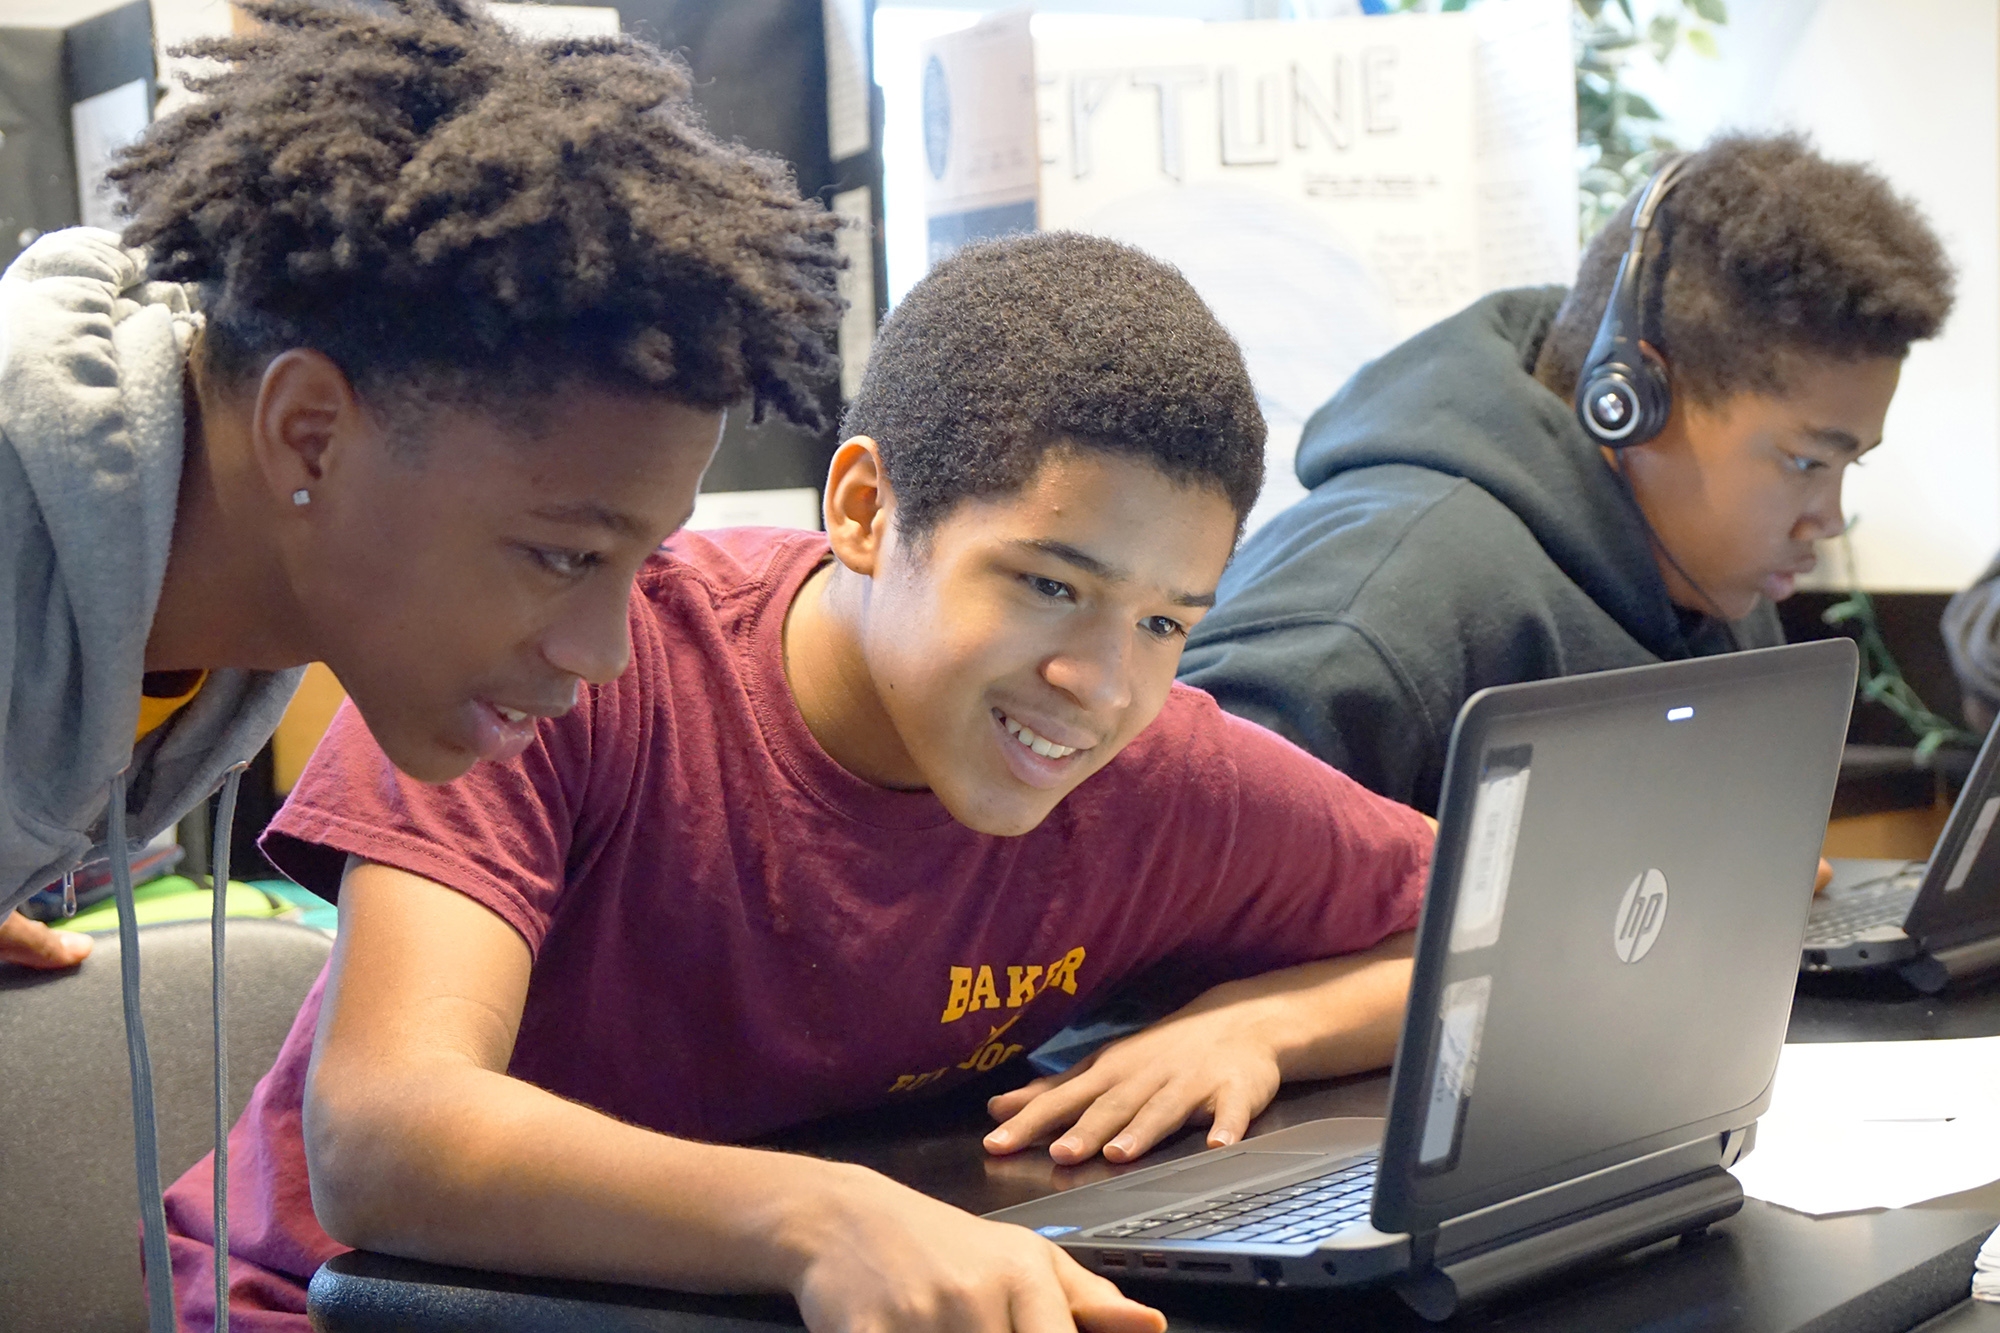 Students use a laptop in a classroom while working together on a coding project.